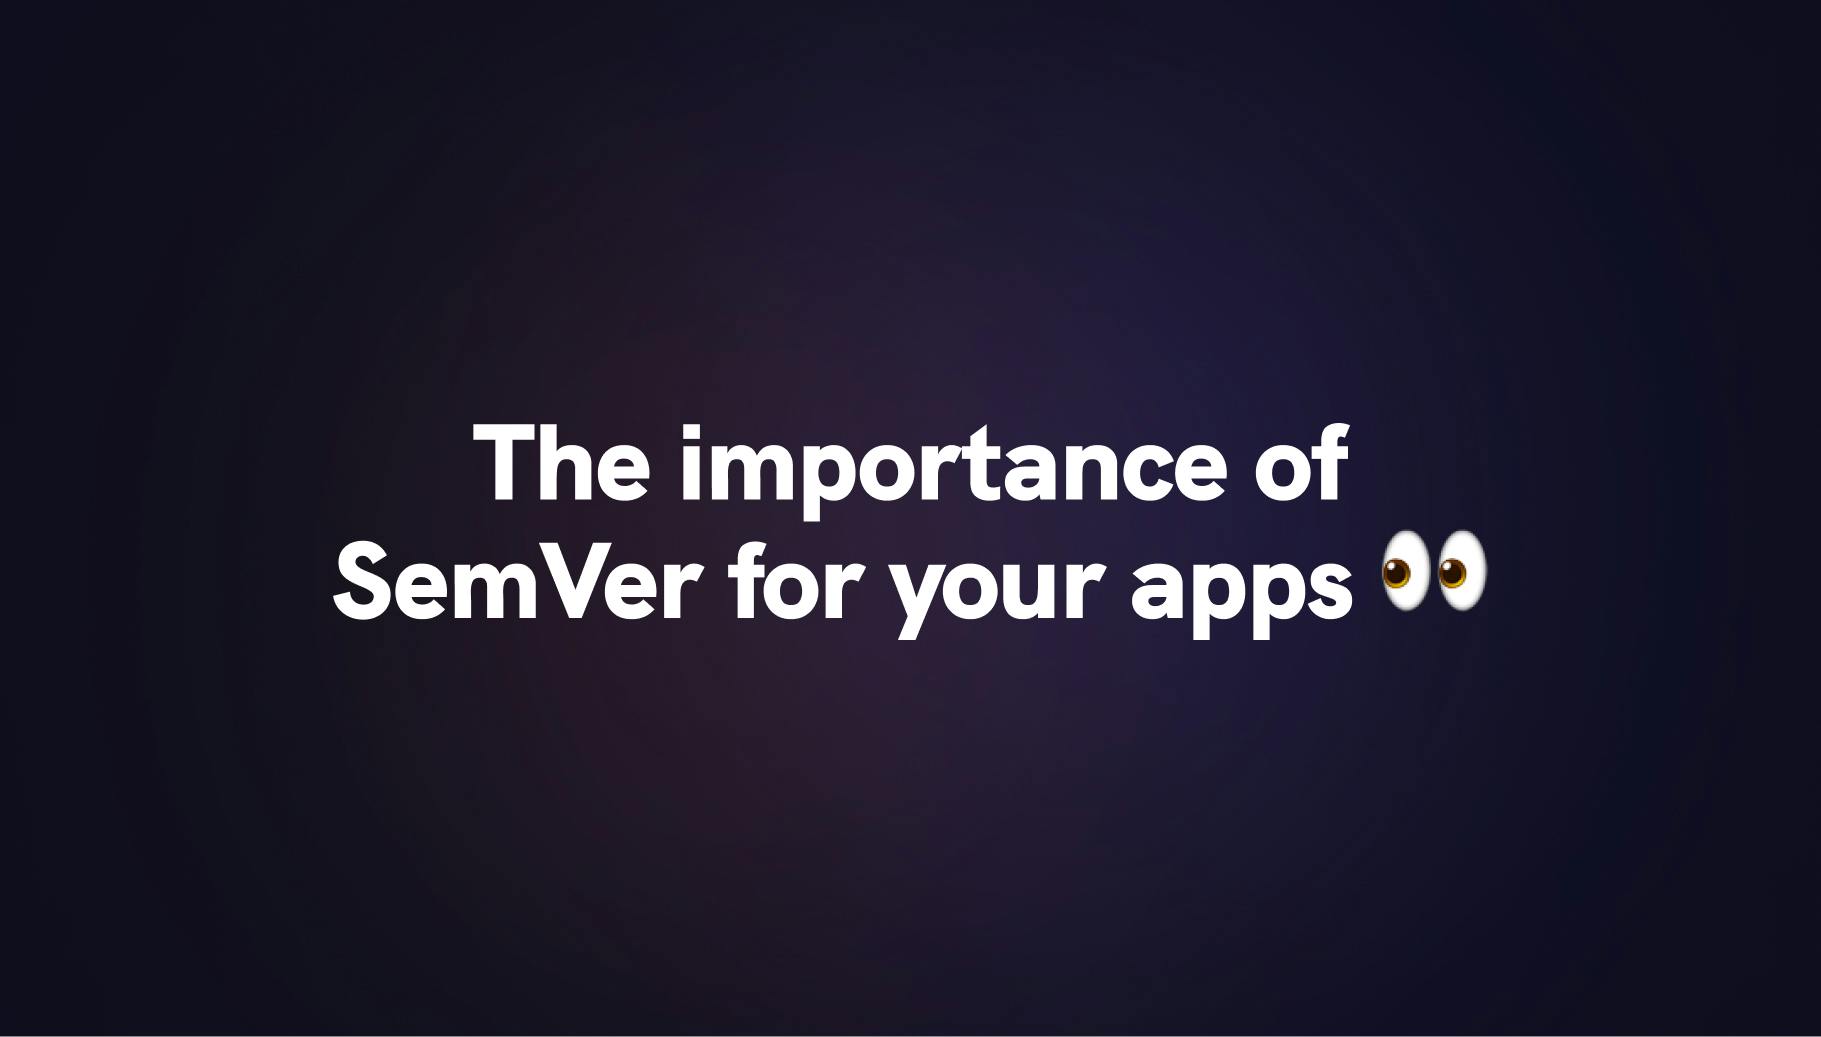 The importance of SemVer for your applications - Qovery